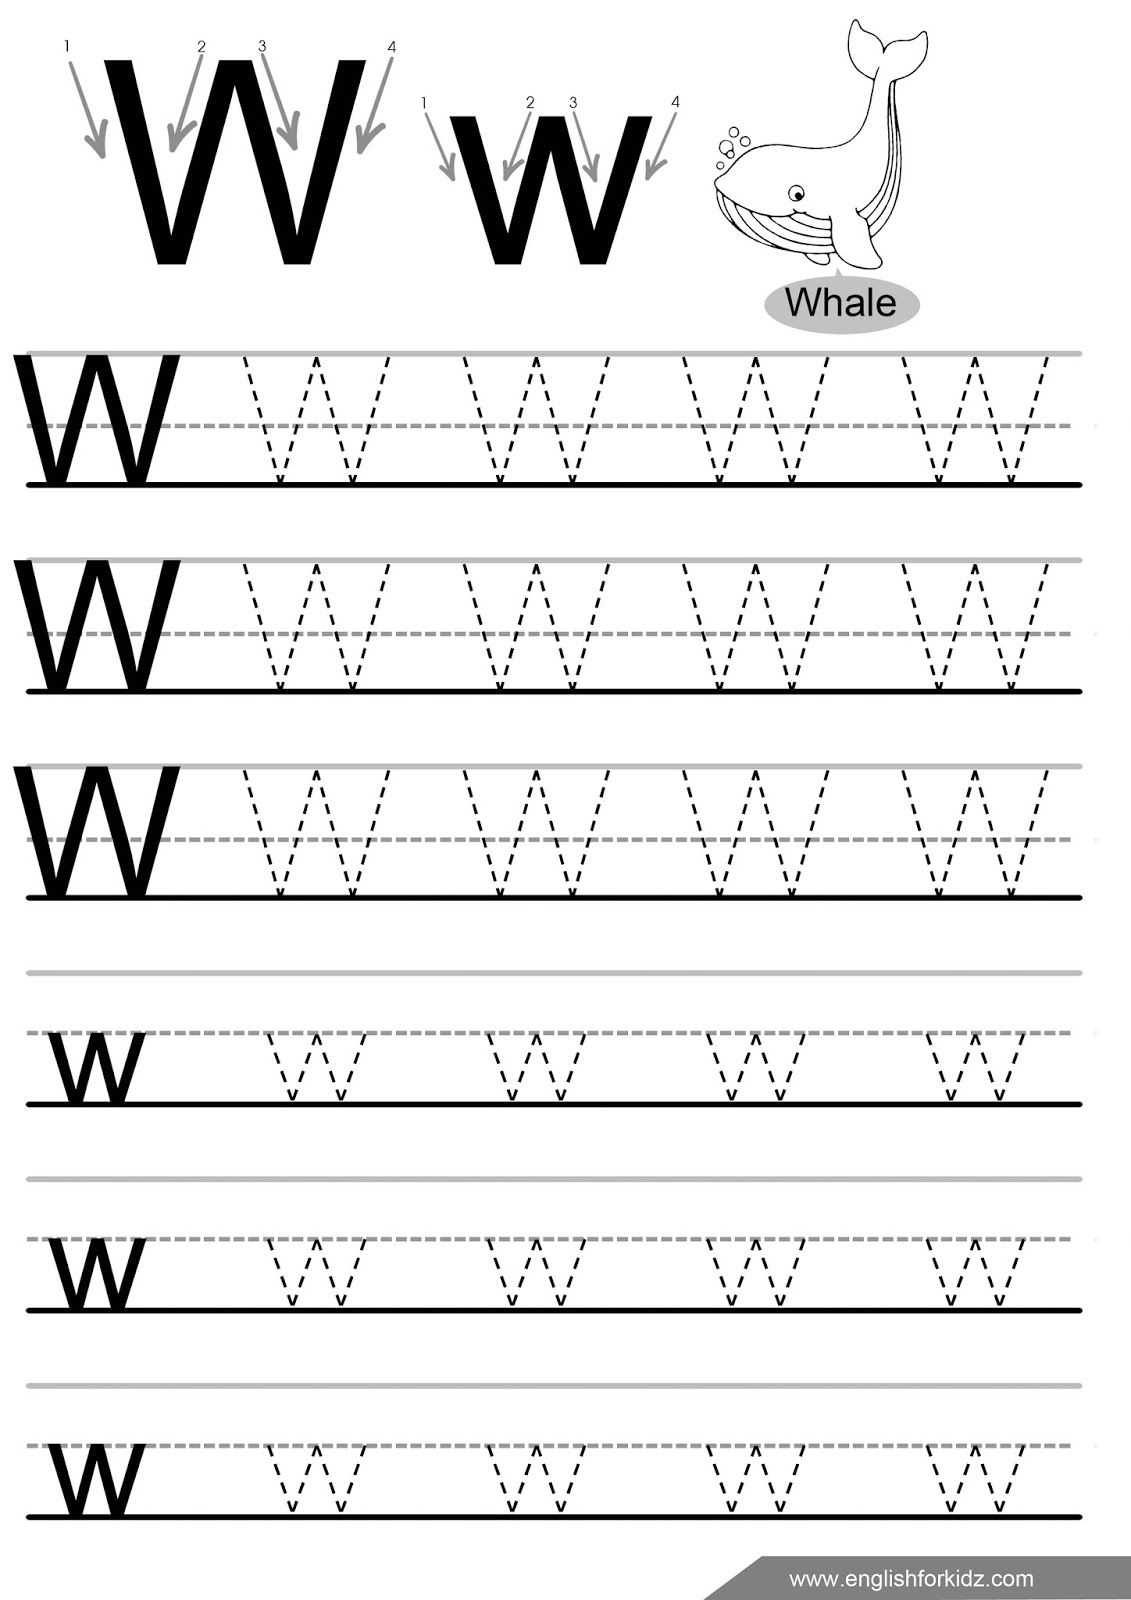 Letter Tracing Worksheets (Letters U - Z) | Letter Tracing intended for Letter W Tracing Page